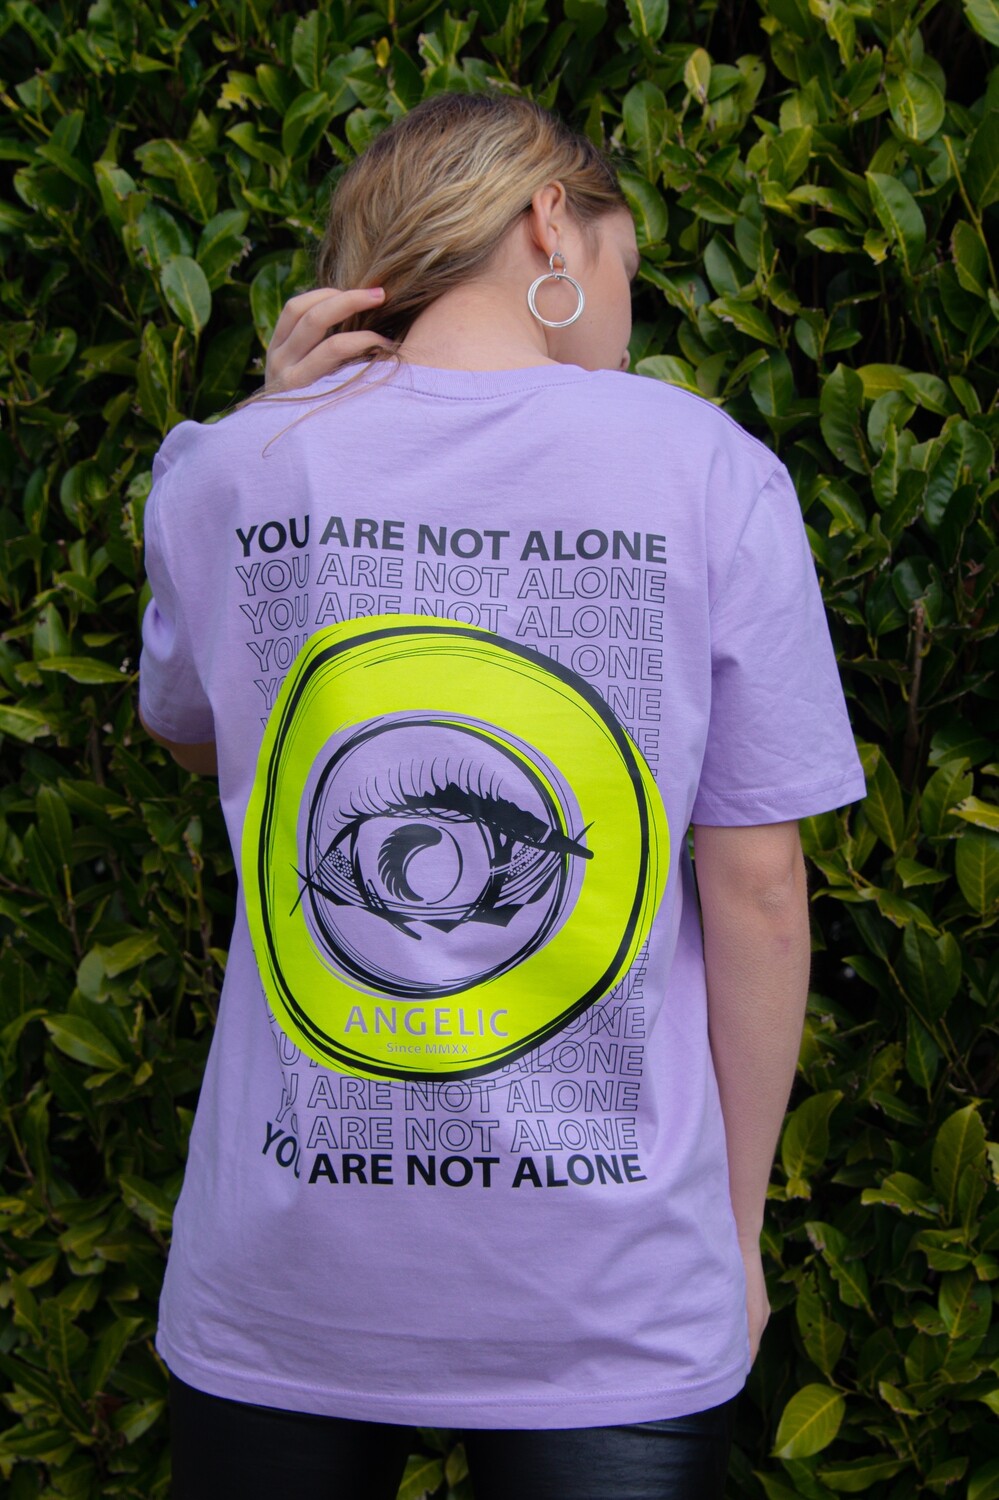 ANGELIC T-Shirt lila, YOU ARE NOT ALONE - UNISEX. Grösse M